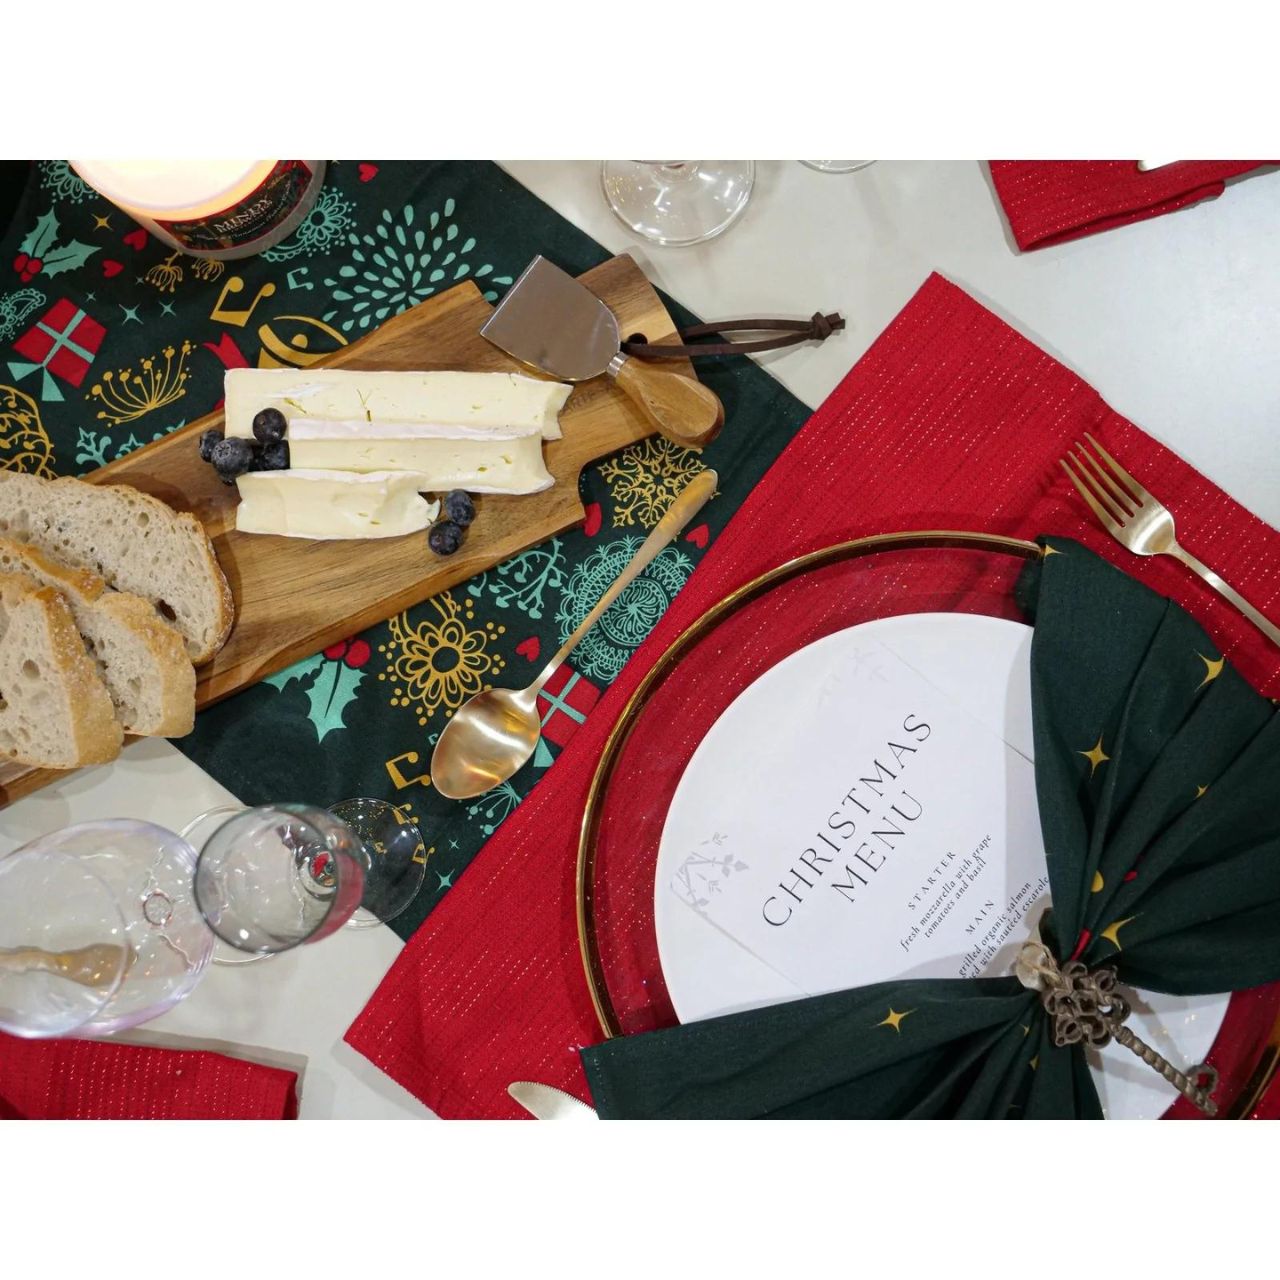 Christmas Wish Table Runner by Mindy Brownes Interiors  A beautiful table runner finished in forest green with a Christmas design that depicts some of Christmas' key elements, such as reindeer, presents, music notes, and more.